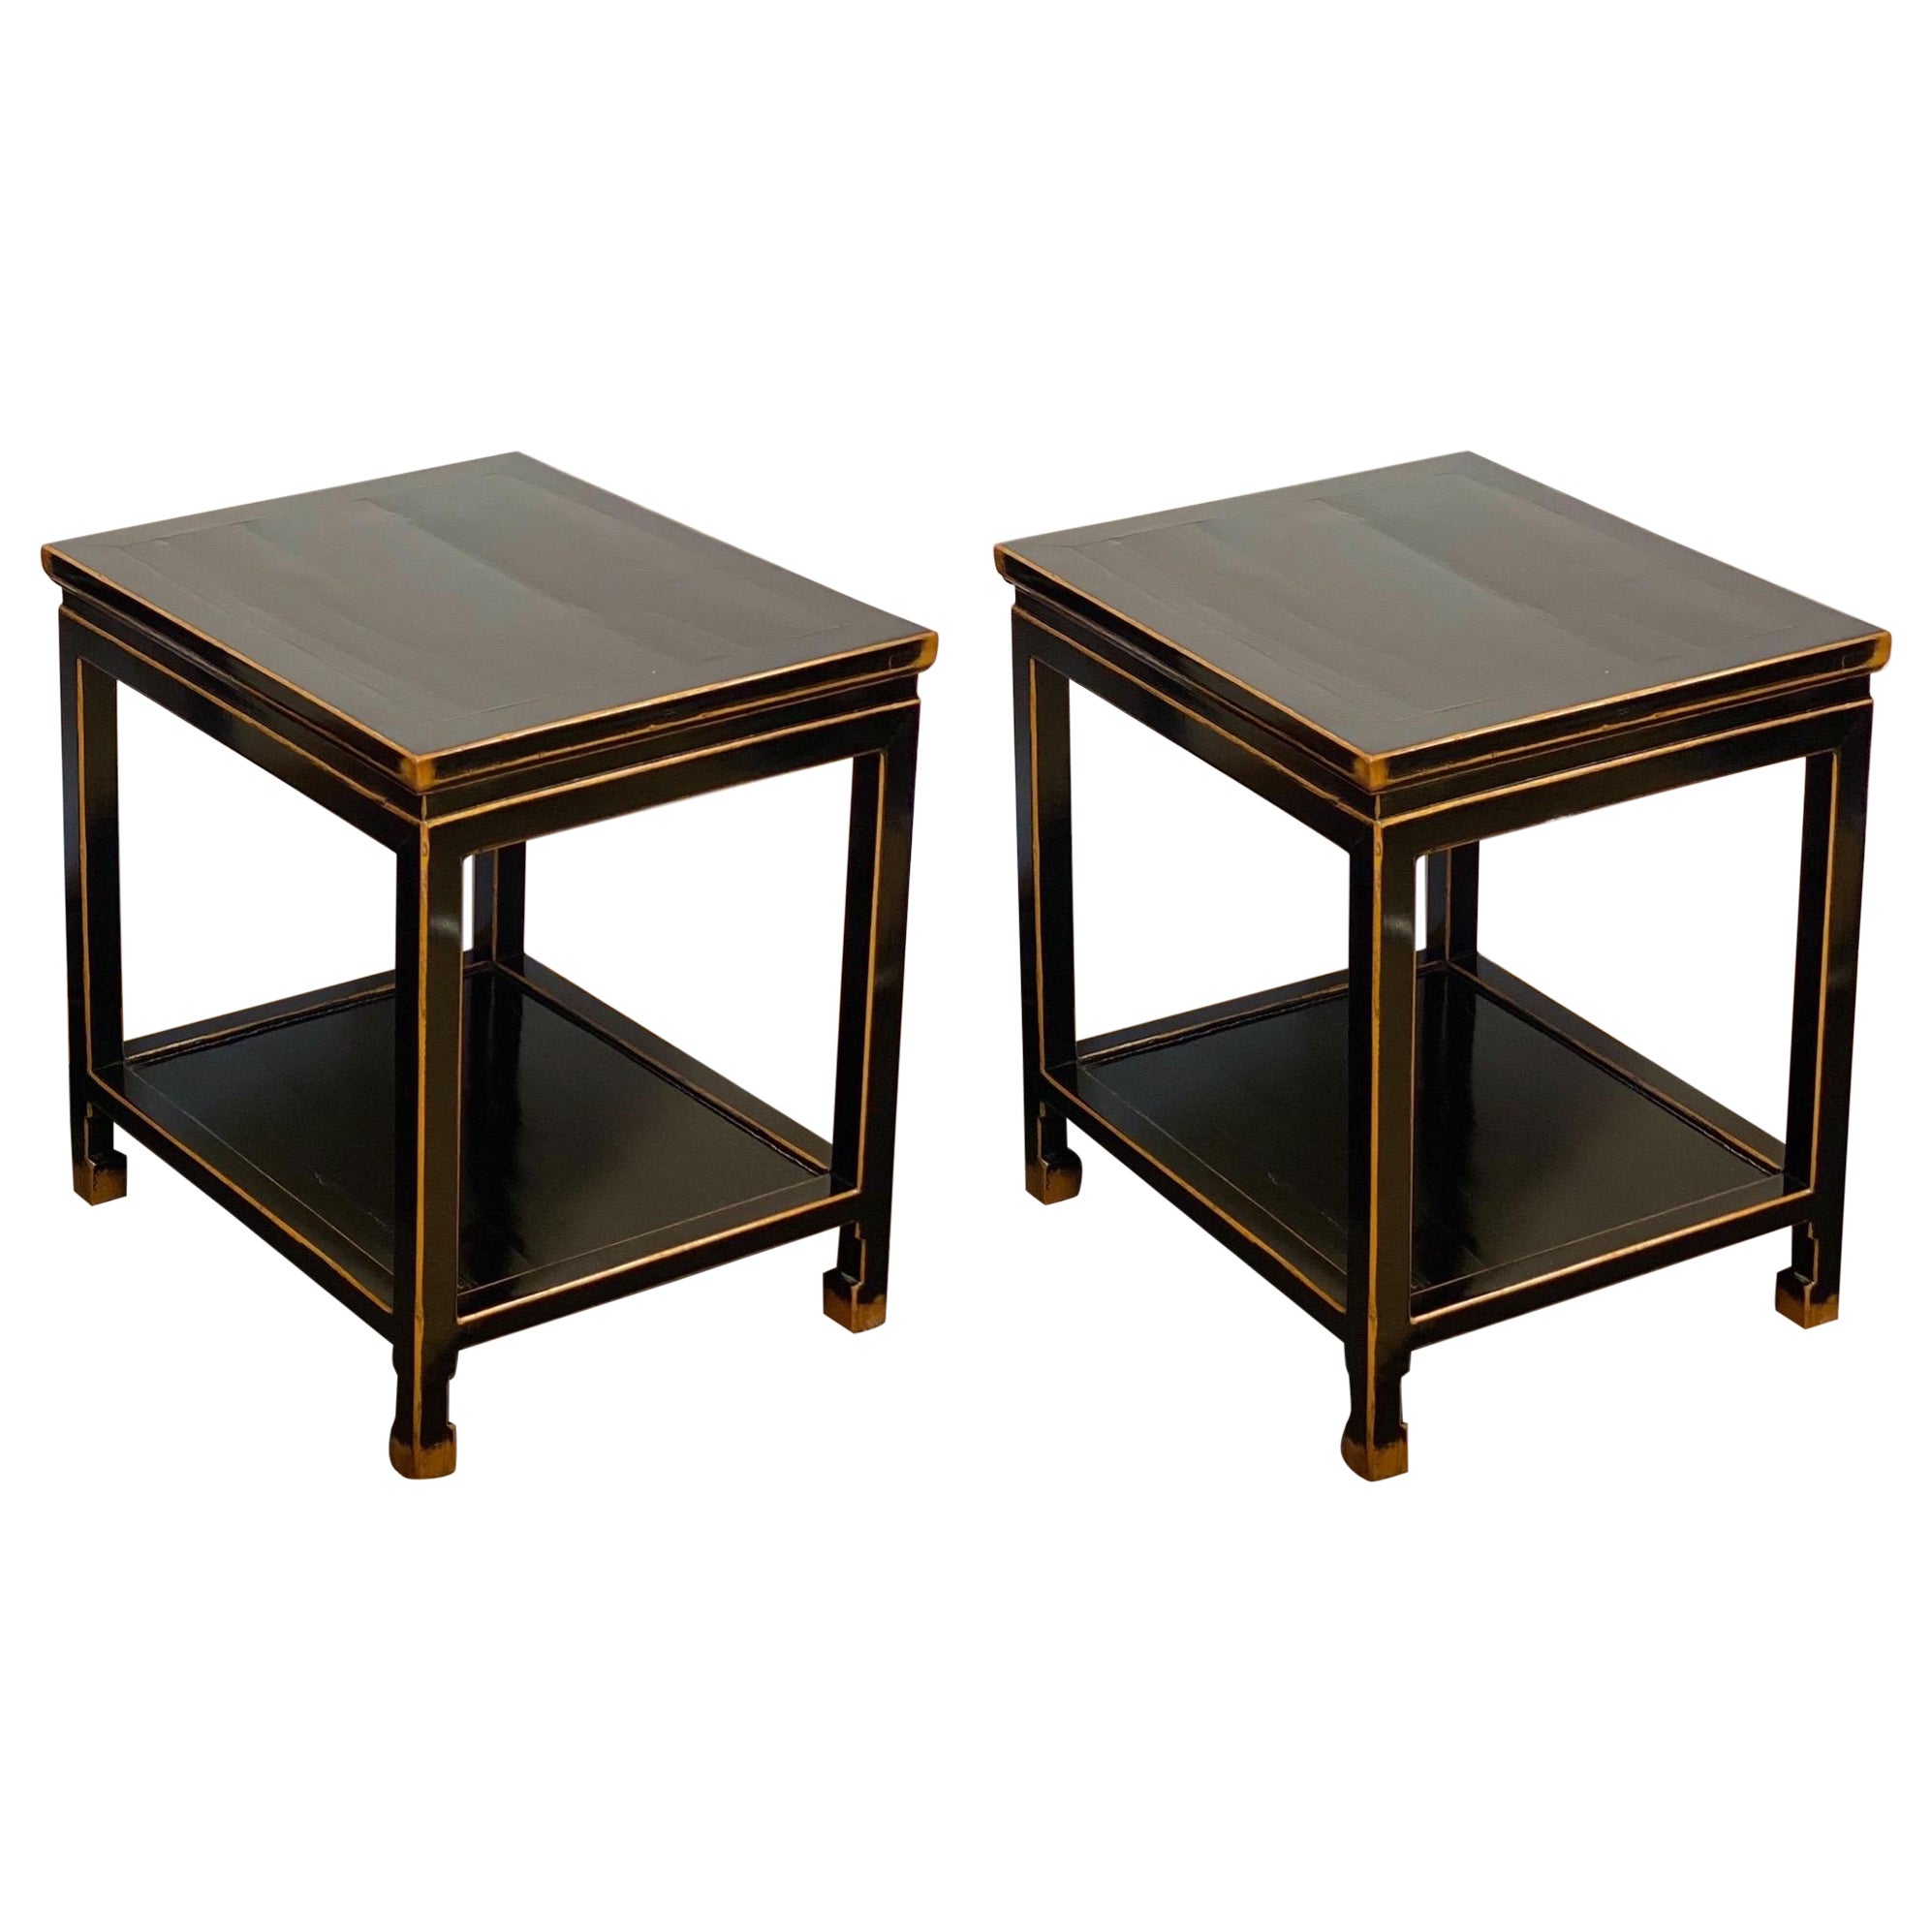 Late 19th Century Chinese Black Lacquer Rectangular Two-Tier Side Tables, Pair